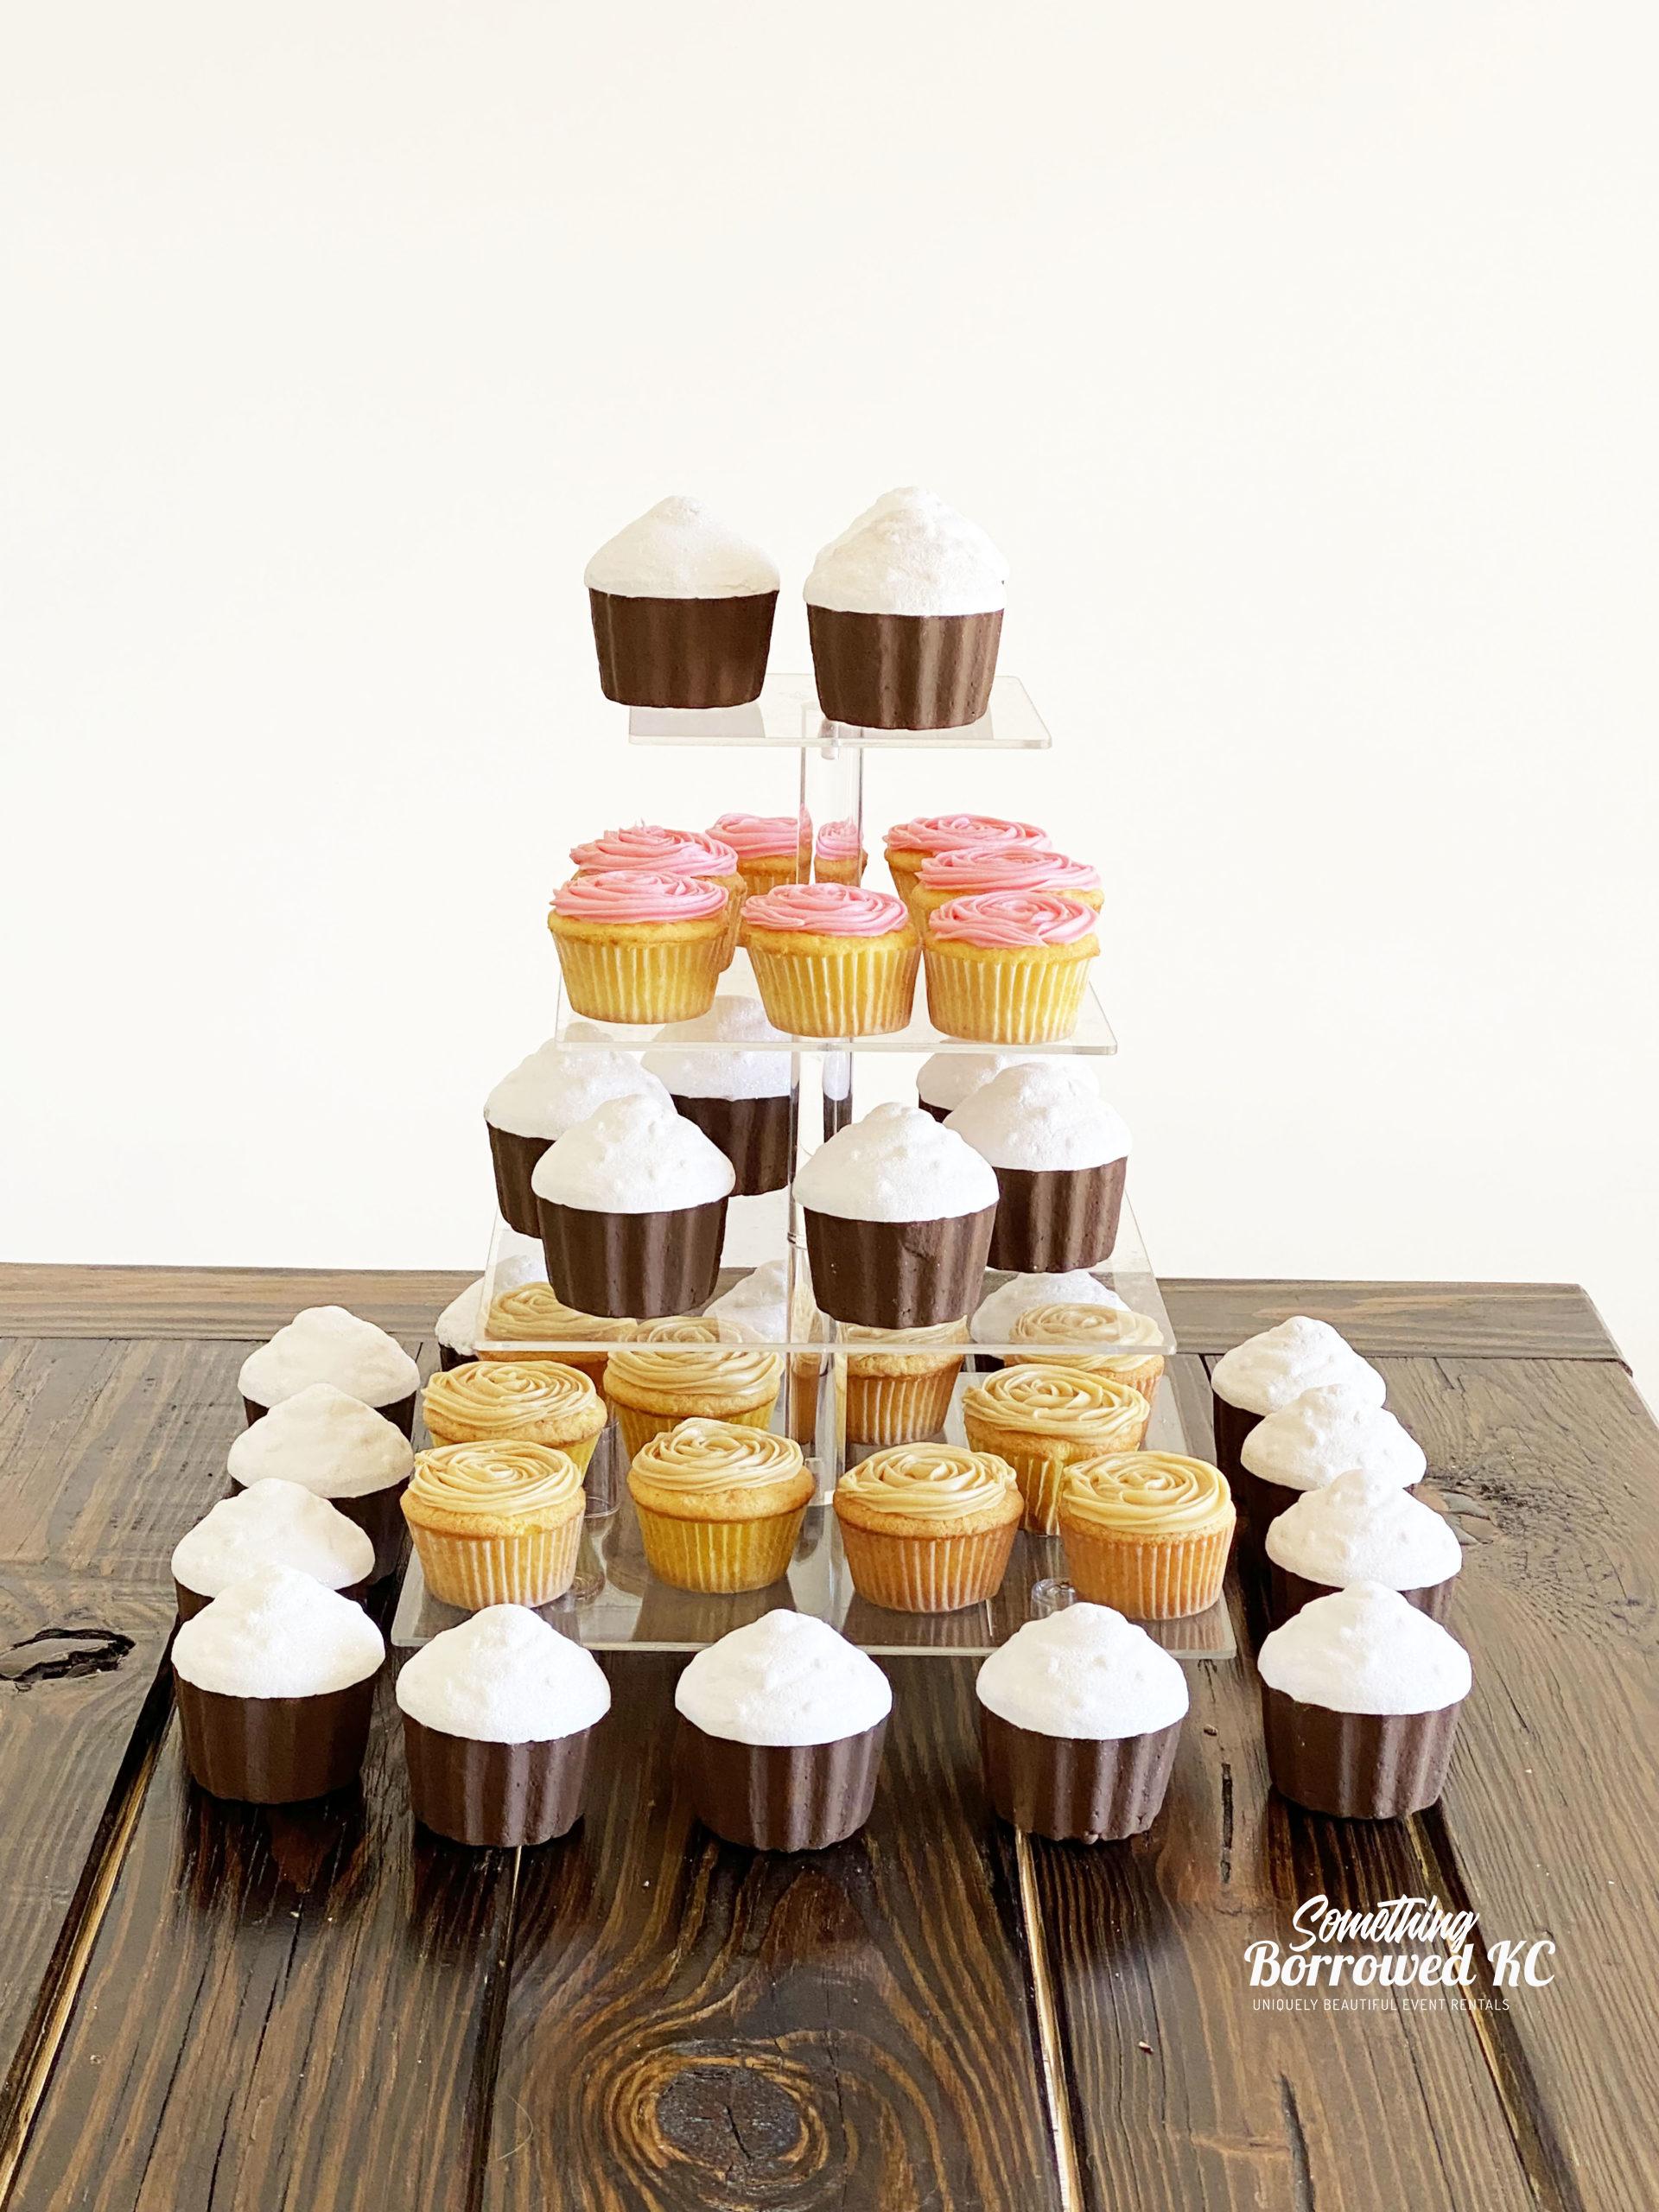 4-Tier Clear Acrylic Round Cupcake Display and Cake Stand with